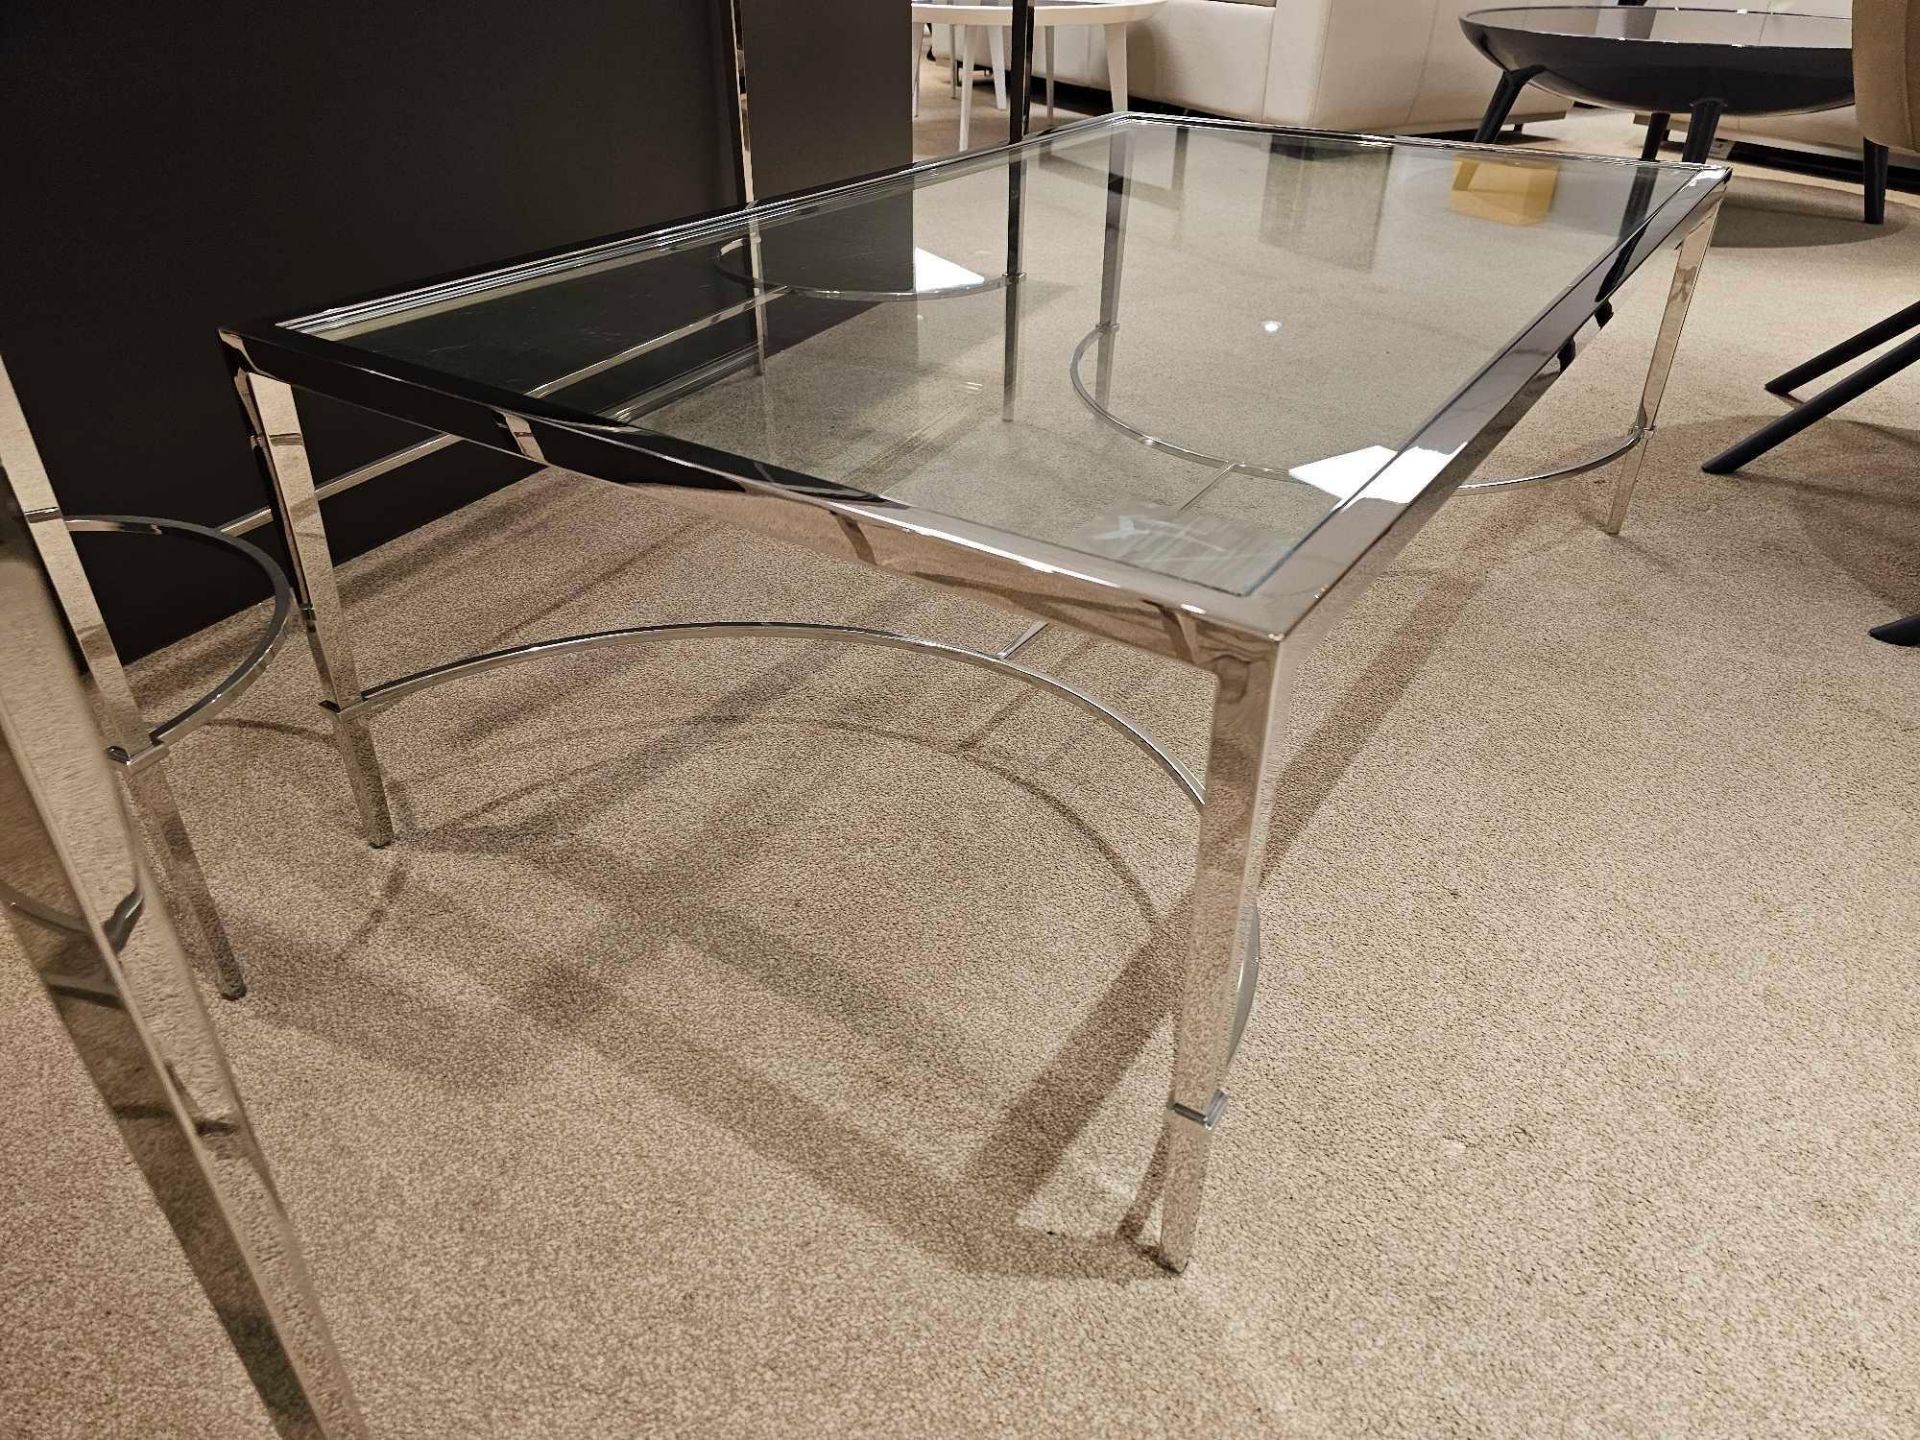 Tokyo Coffee Table by Kesterport The Tokyo coffee table with its clear glass top and a refined - Bild 3 aus 4